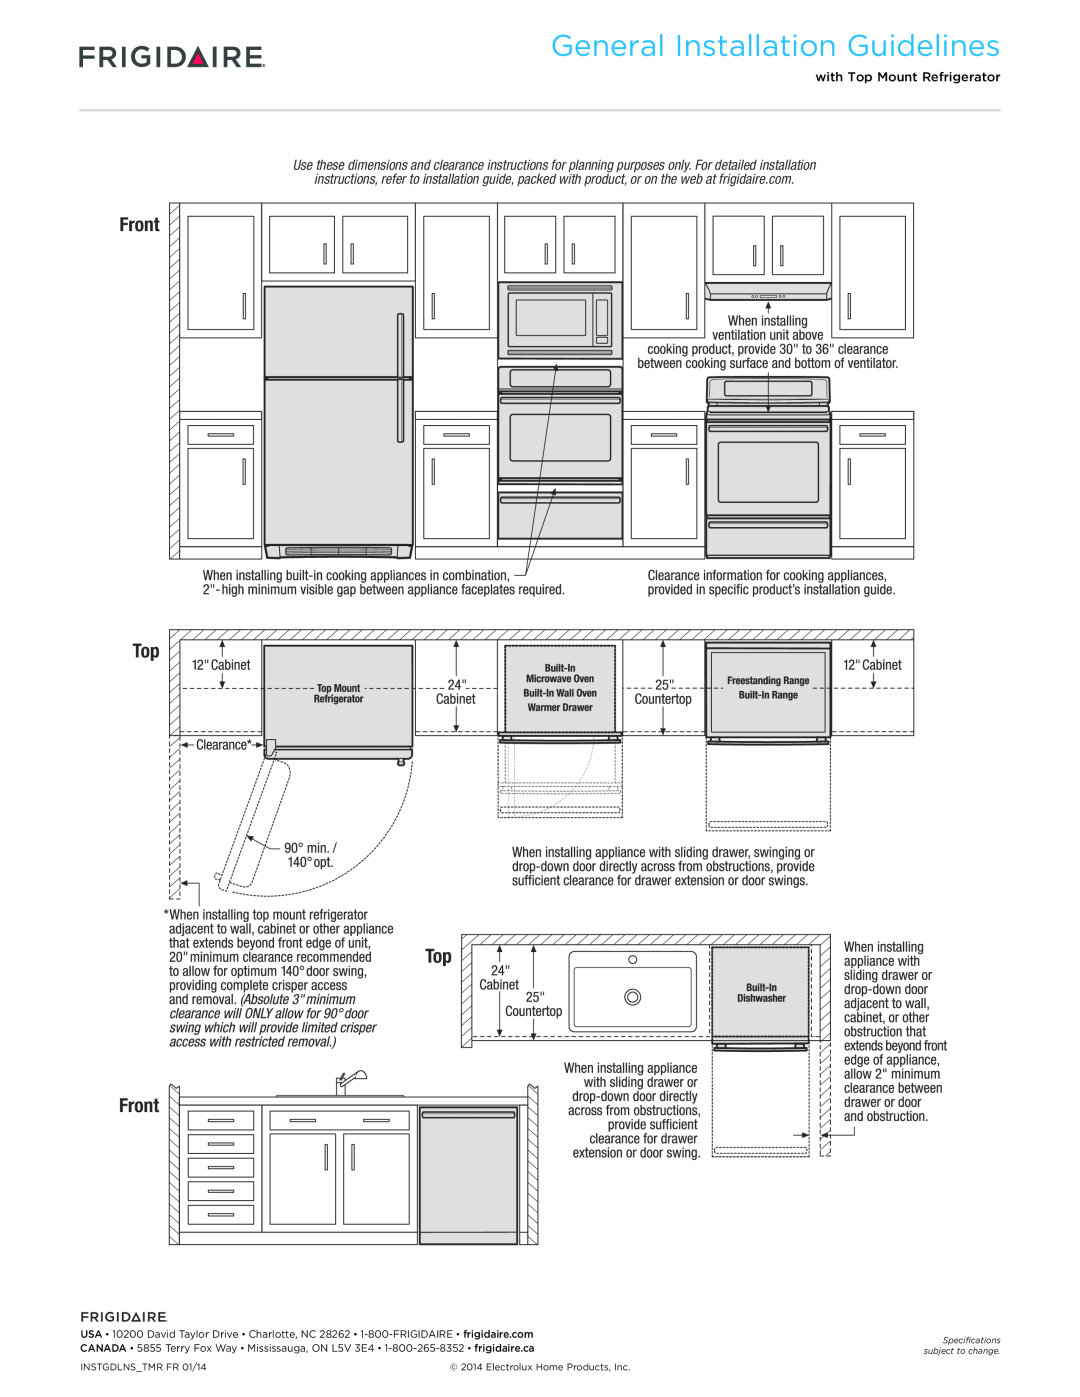 Frigidaire FFHT1521QW dimensions General Installation Guidelines, Front 